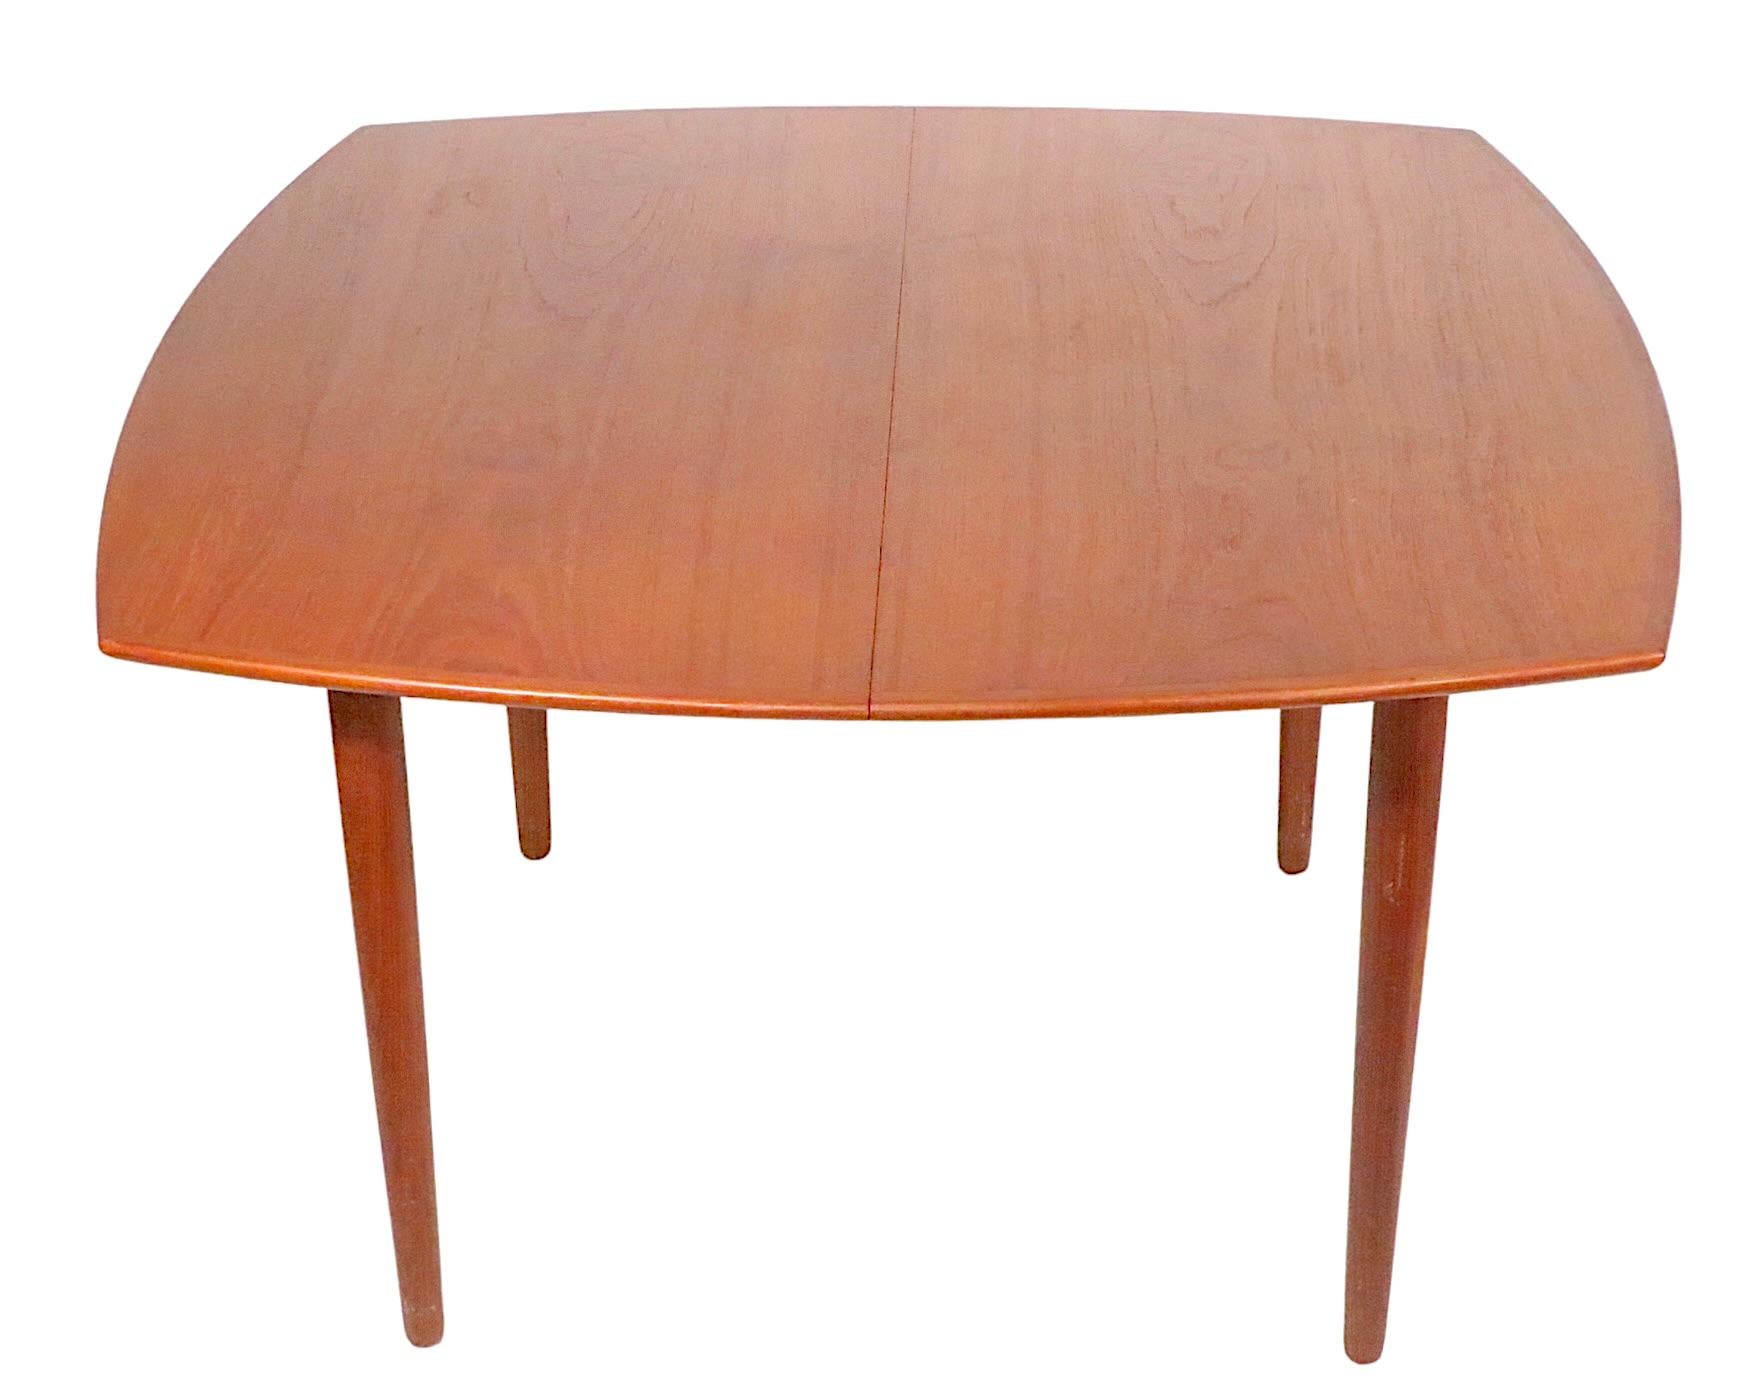 Danish Mid Century Modern Teak Extension  Dining Table by H W Klein  c 1950's For Sale 14